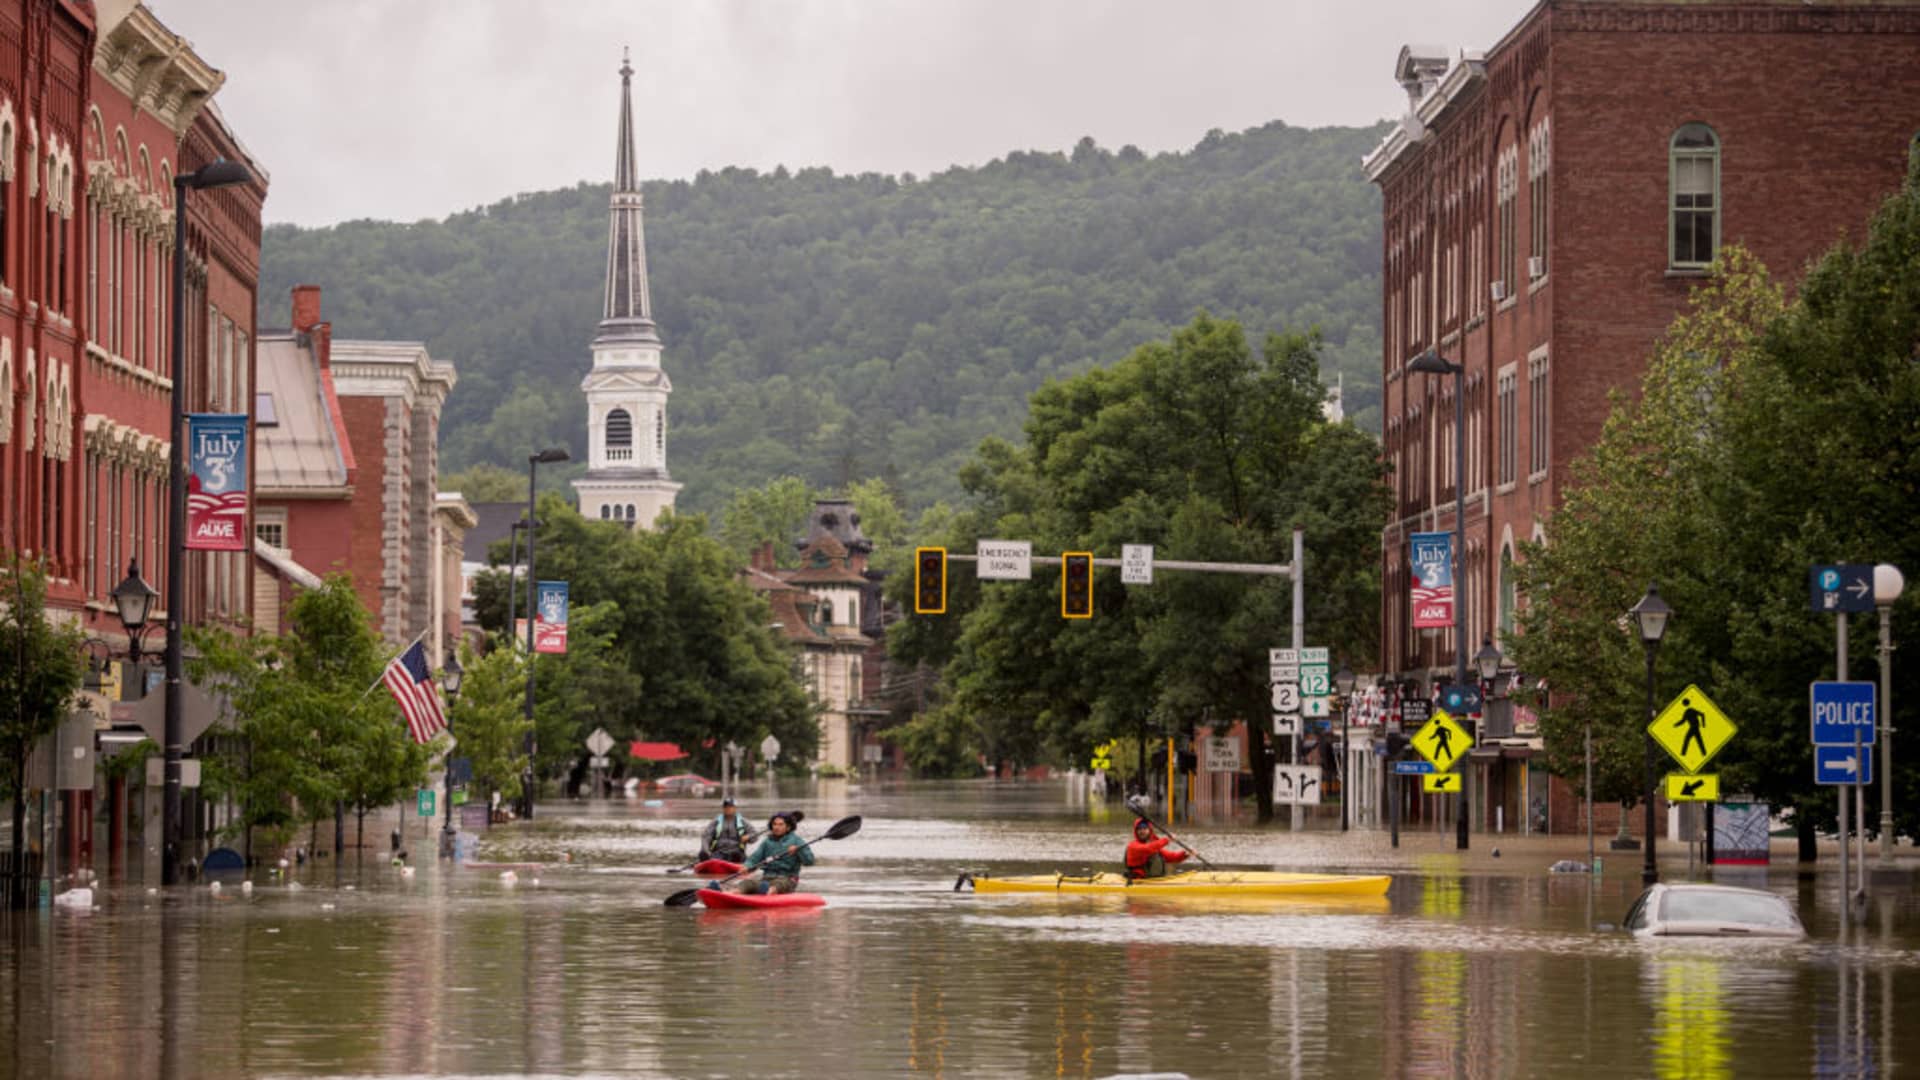 Flooding in downtown Montpelier, Vermont on Tuesday, July 11, 2023. Vermont has been under a State of Emergency since Sunday evening as heavy rains continued through Tuesday morning causing flooding across the state.